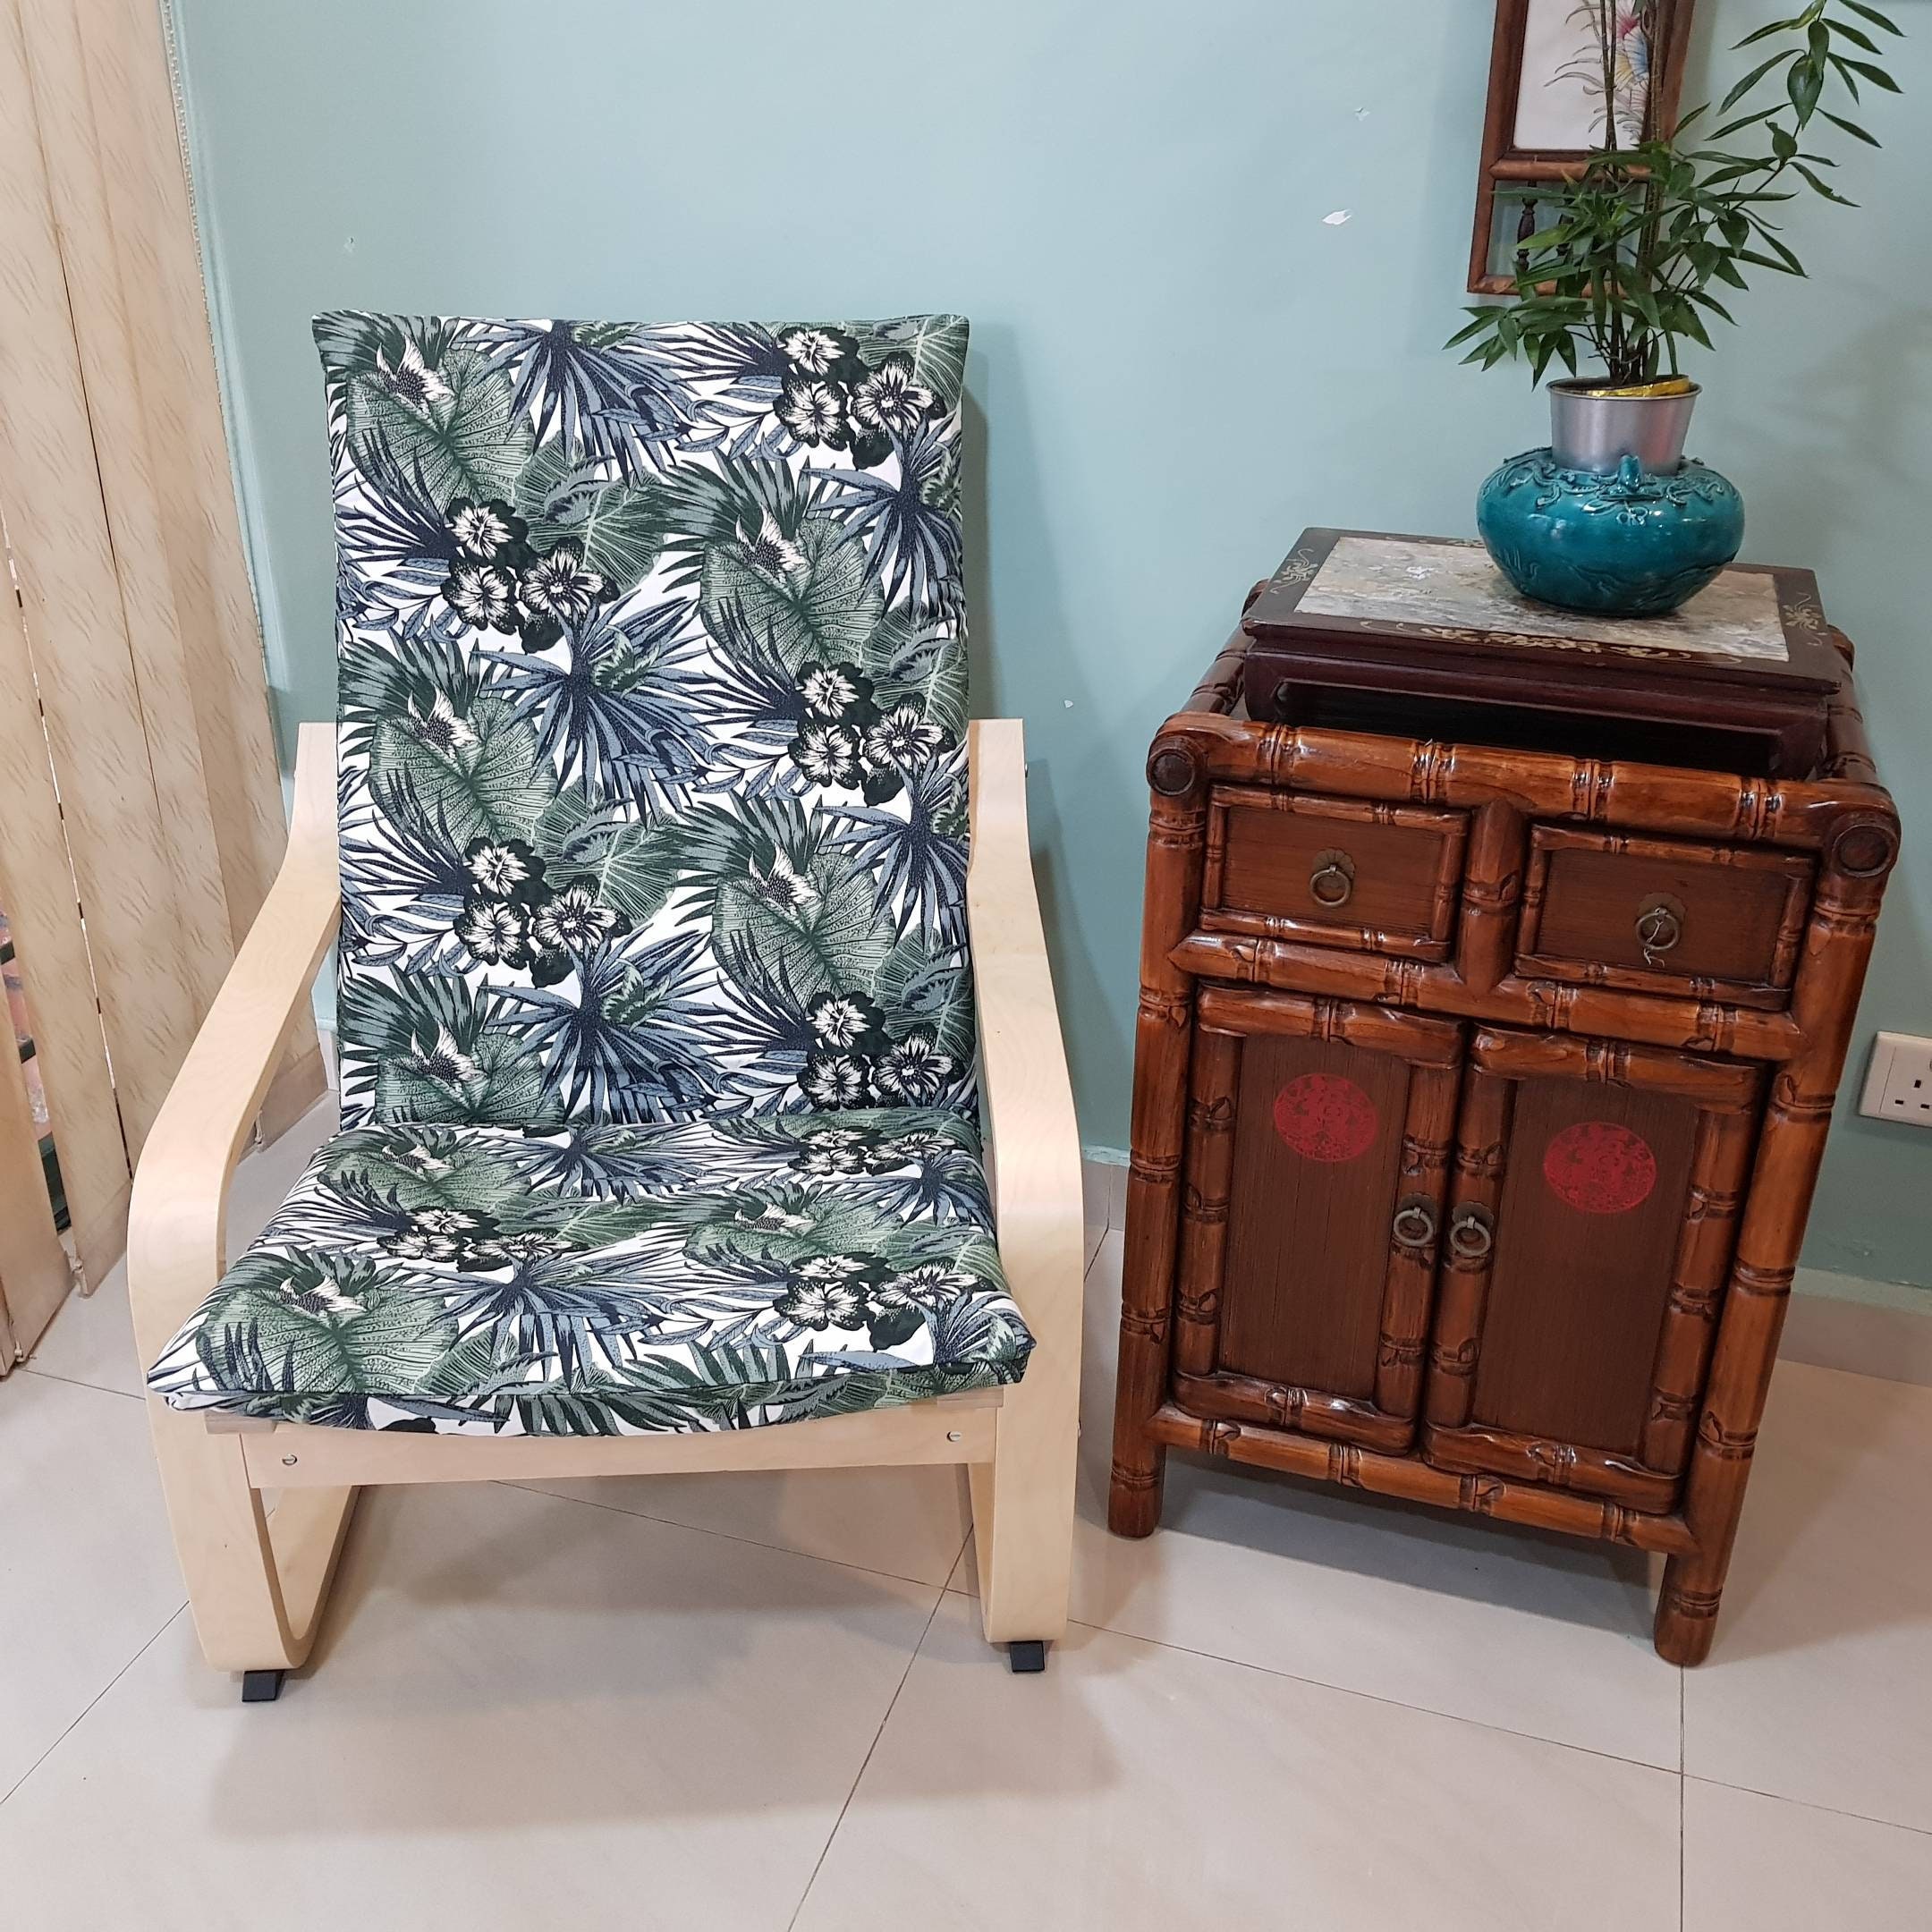 IKEA Poang Chair Cushion Cover Tropical Forest Print 